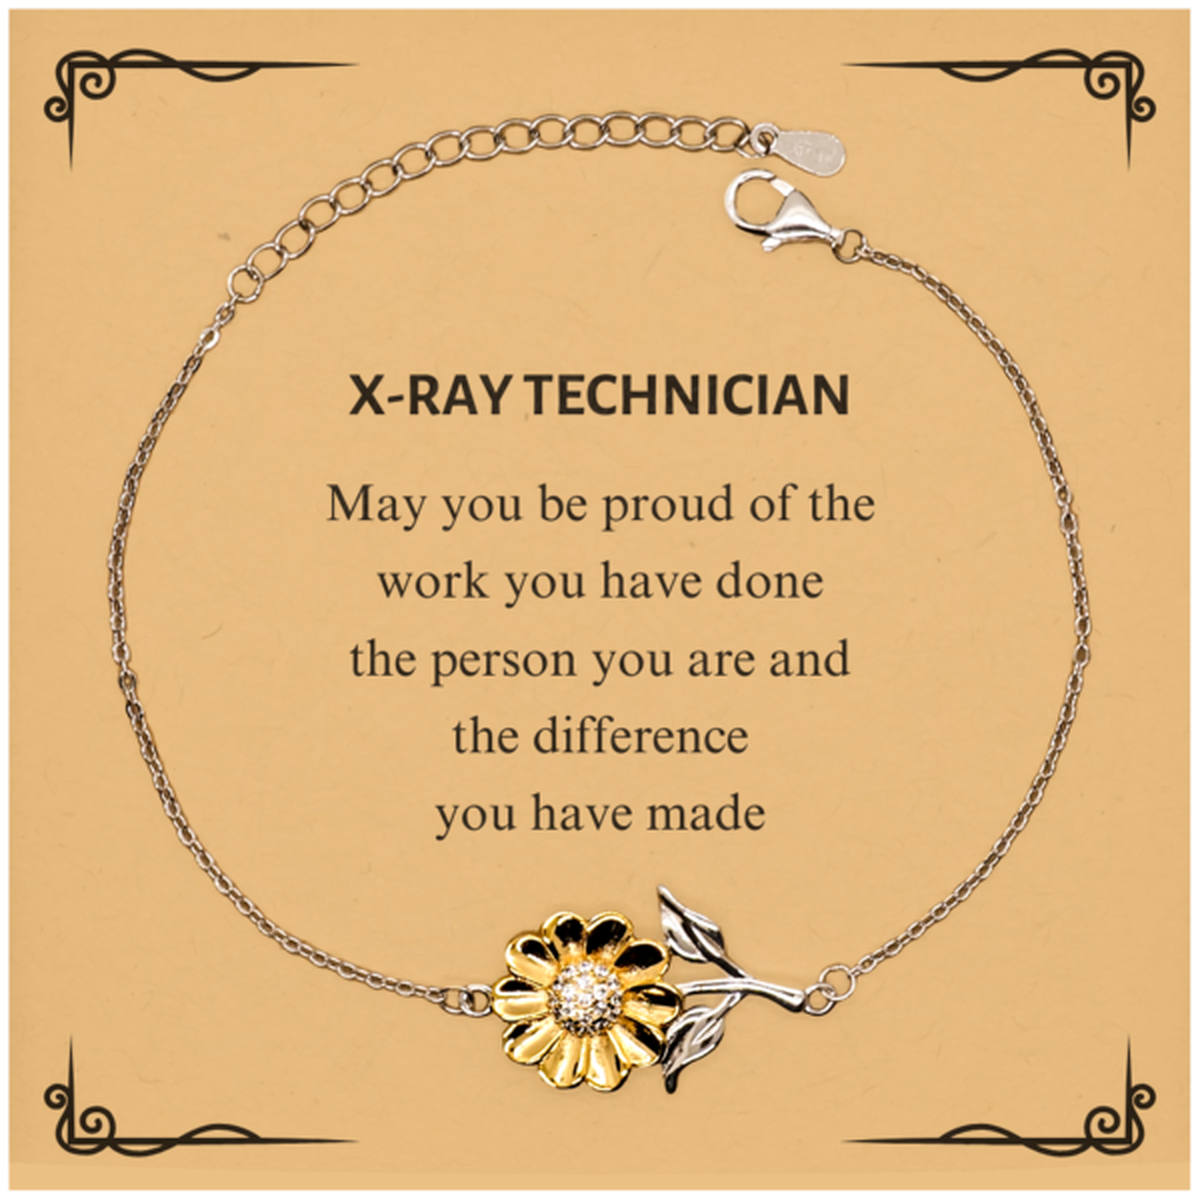 X-Ray Technician May you be proud of the work you have done, Retirement X-Ray Technician Sunflower Bracelet for Colleague Appreciation Gifts Amazing for X-Ray Technician